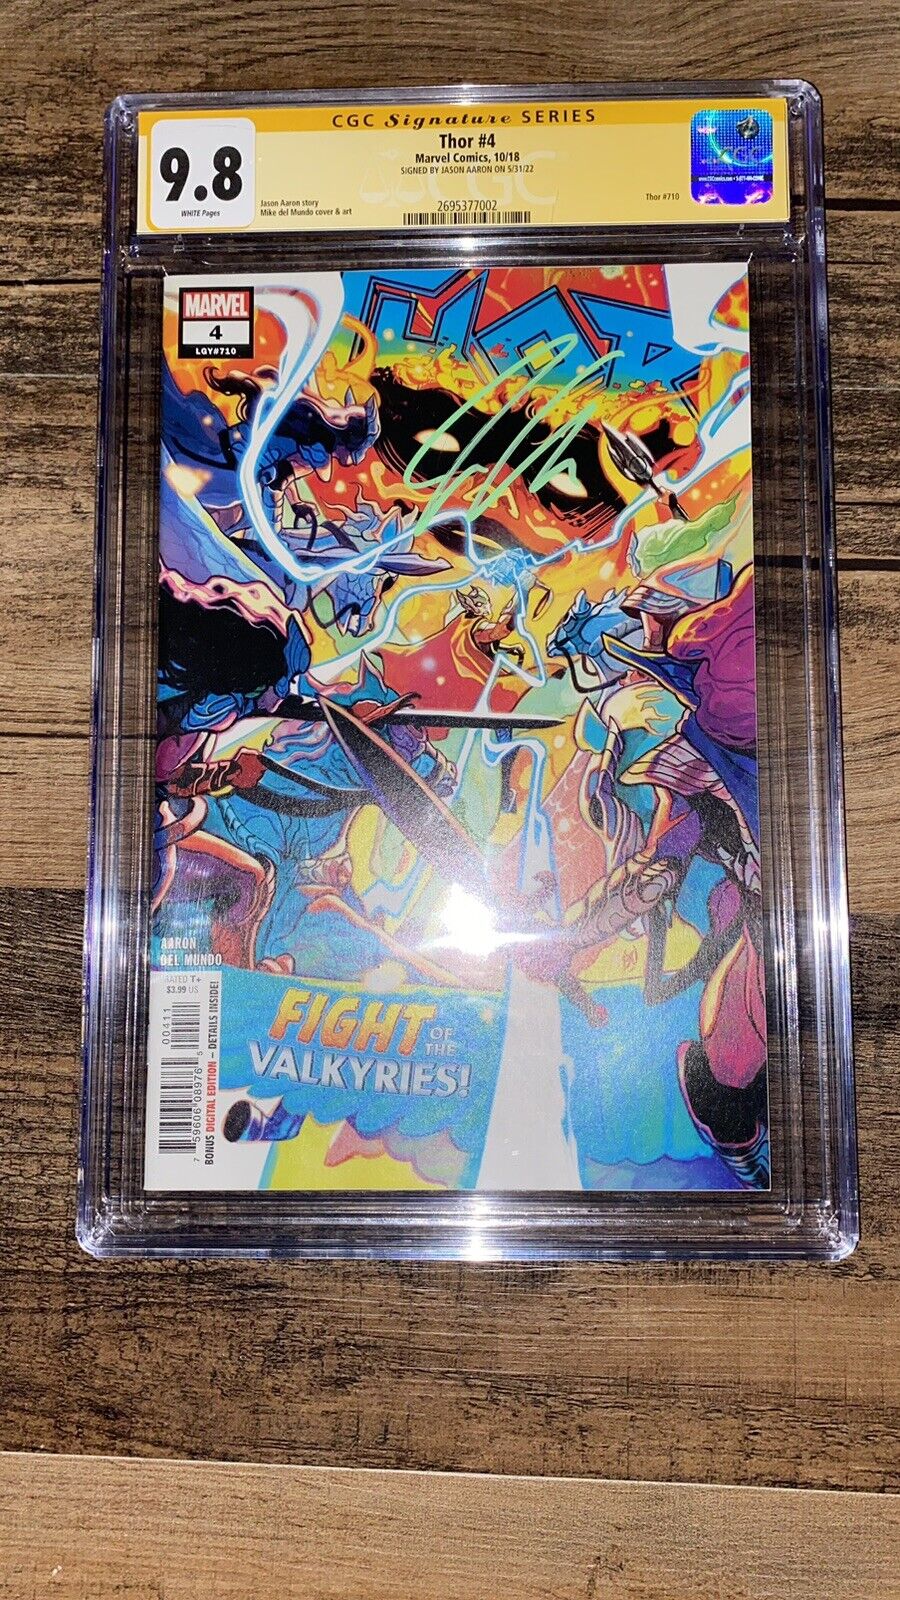 Thor #4 CGC 9.8- Fight of The Valkyries signed by Jason Aaron